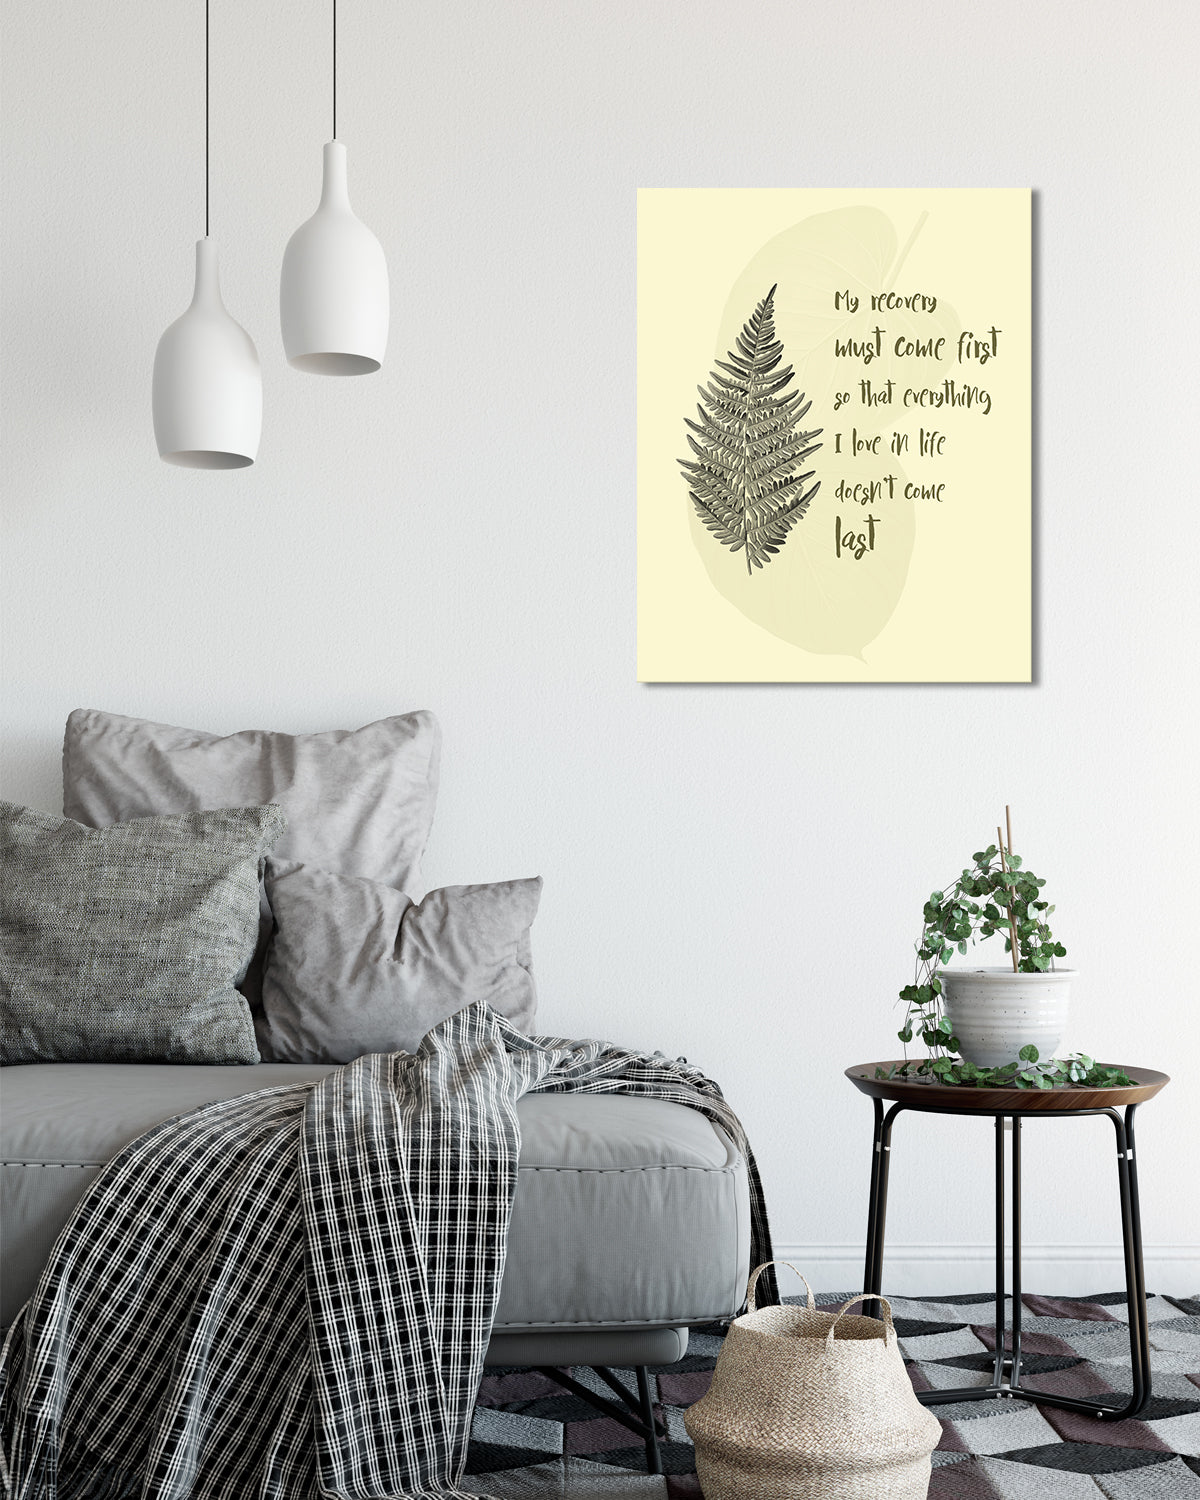 Recovery Quote Canvas - Addiction Recovery Wall Art Decor  - Sobriety Anniversary - unframed artwork printed on canvas